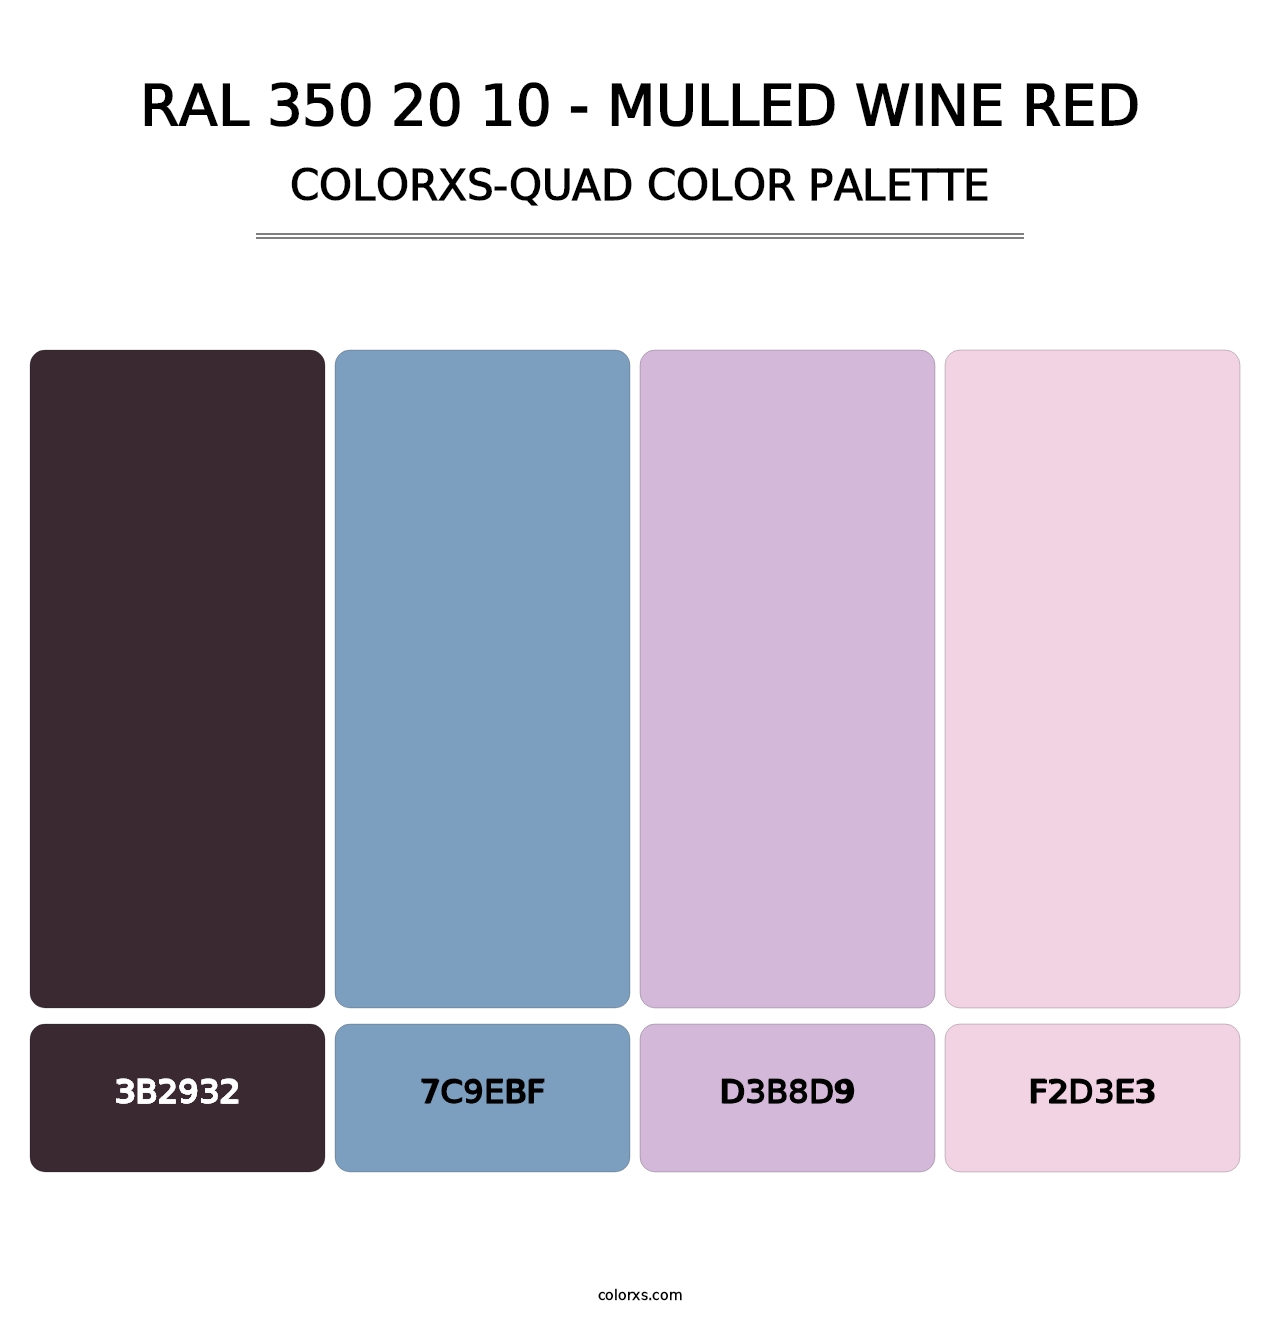 RAL 350 20 10 - Mulled Wine Red - Colorxs Quad Palette